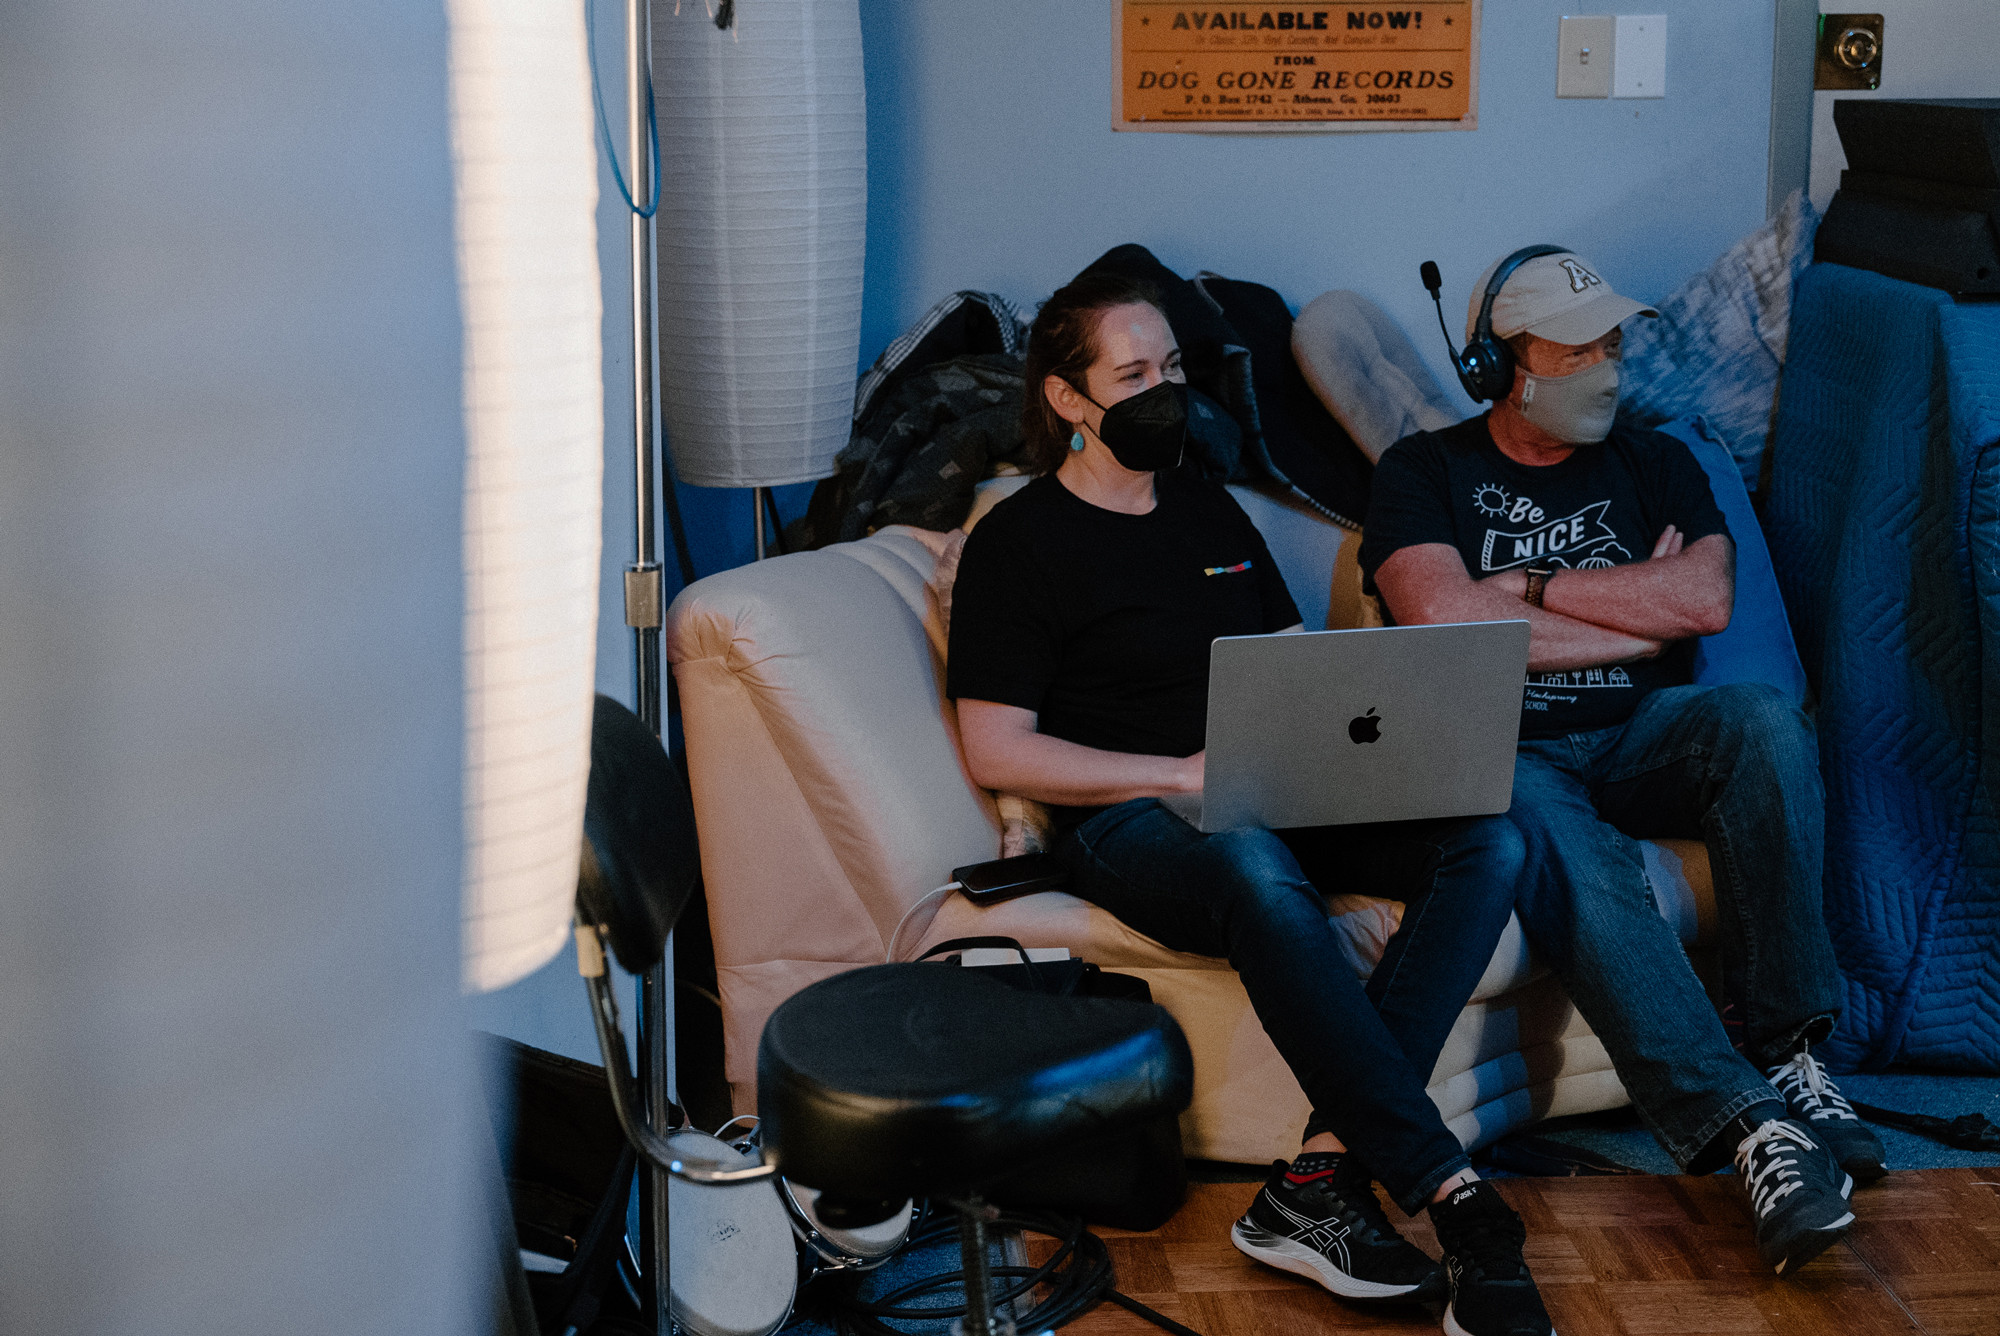 Two members of the production team sitting side-by-side on a couch.